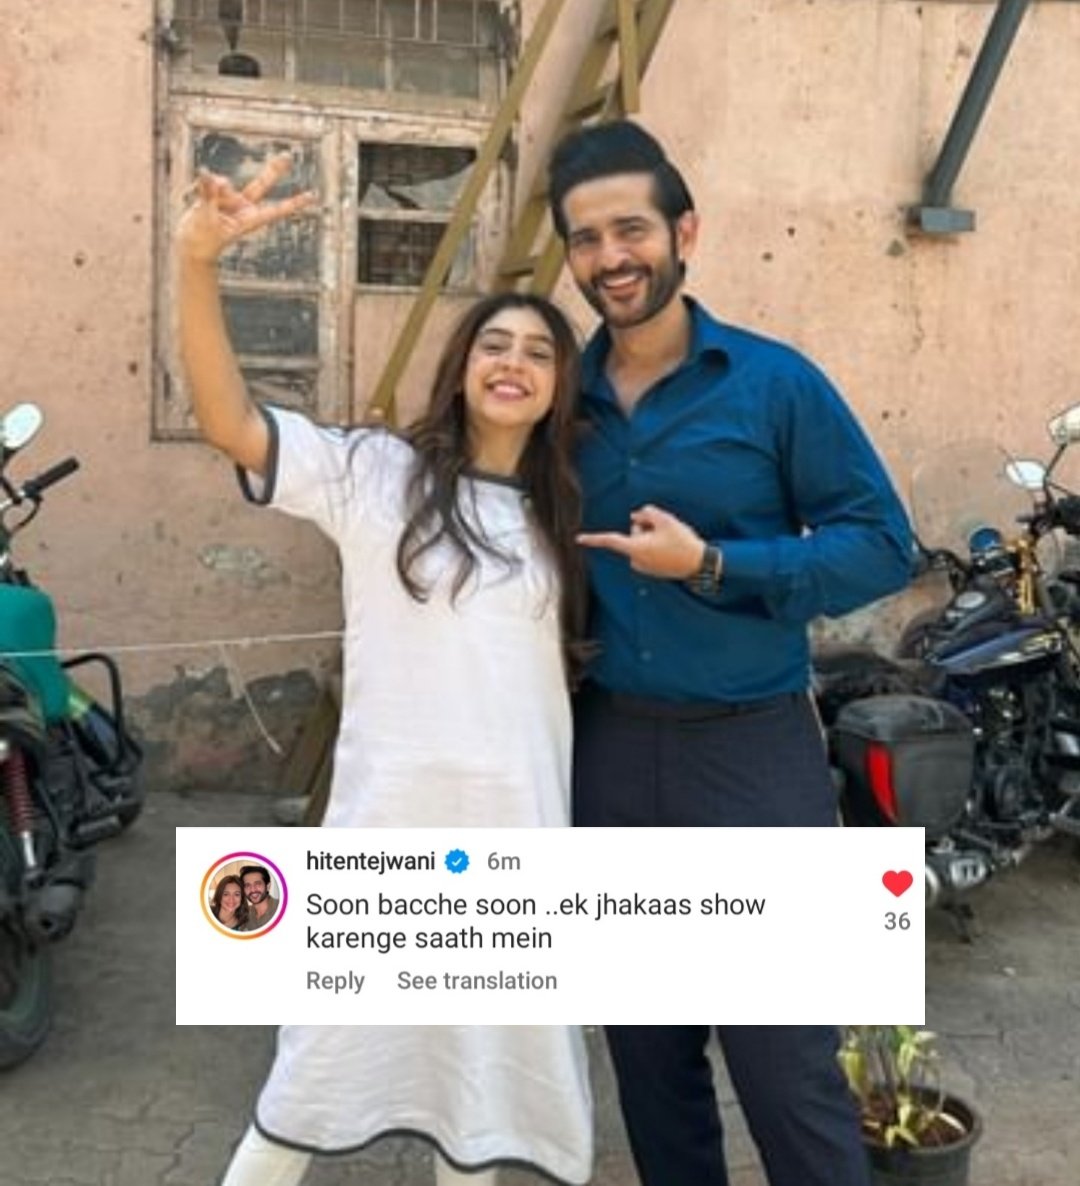 Now manifesting these two will be on a variety show together in the near future🤞🫶🧿 

Ps : That bacche word has my whole heart🥺🤍

#NitiTaylor #HitenTejwani 
#BadeAccheLagteHain2 #balh2 
#PrachiKapoor #LakhanKapoor